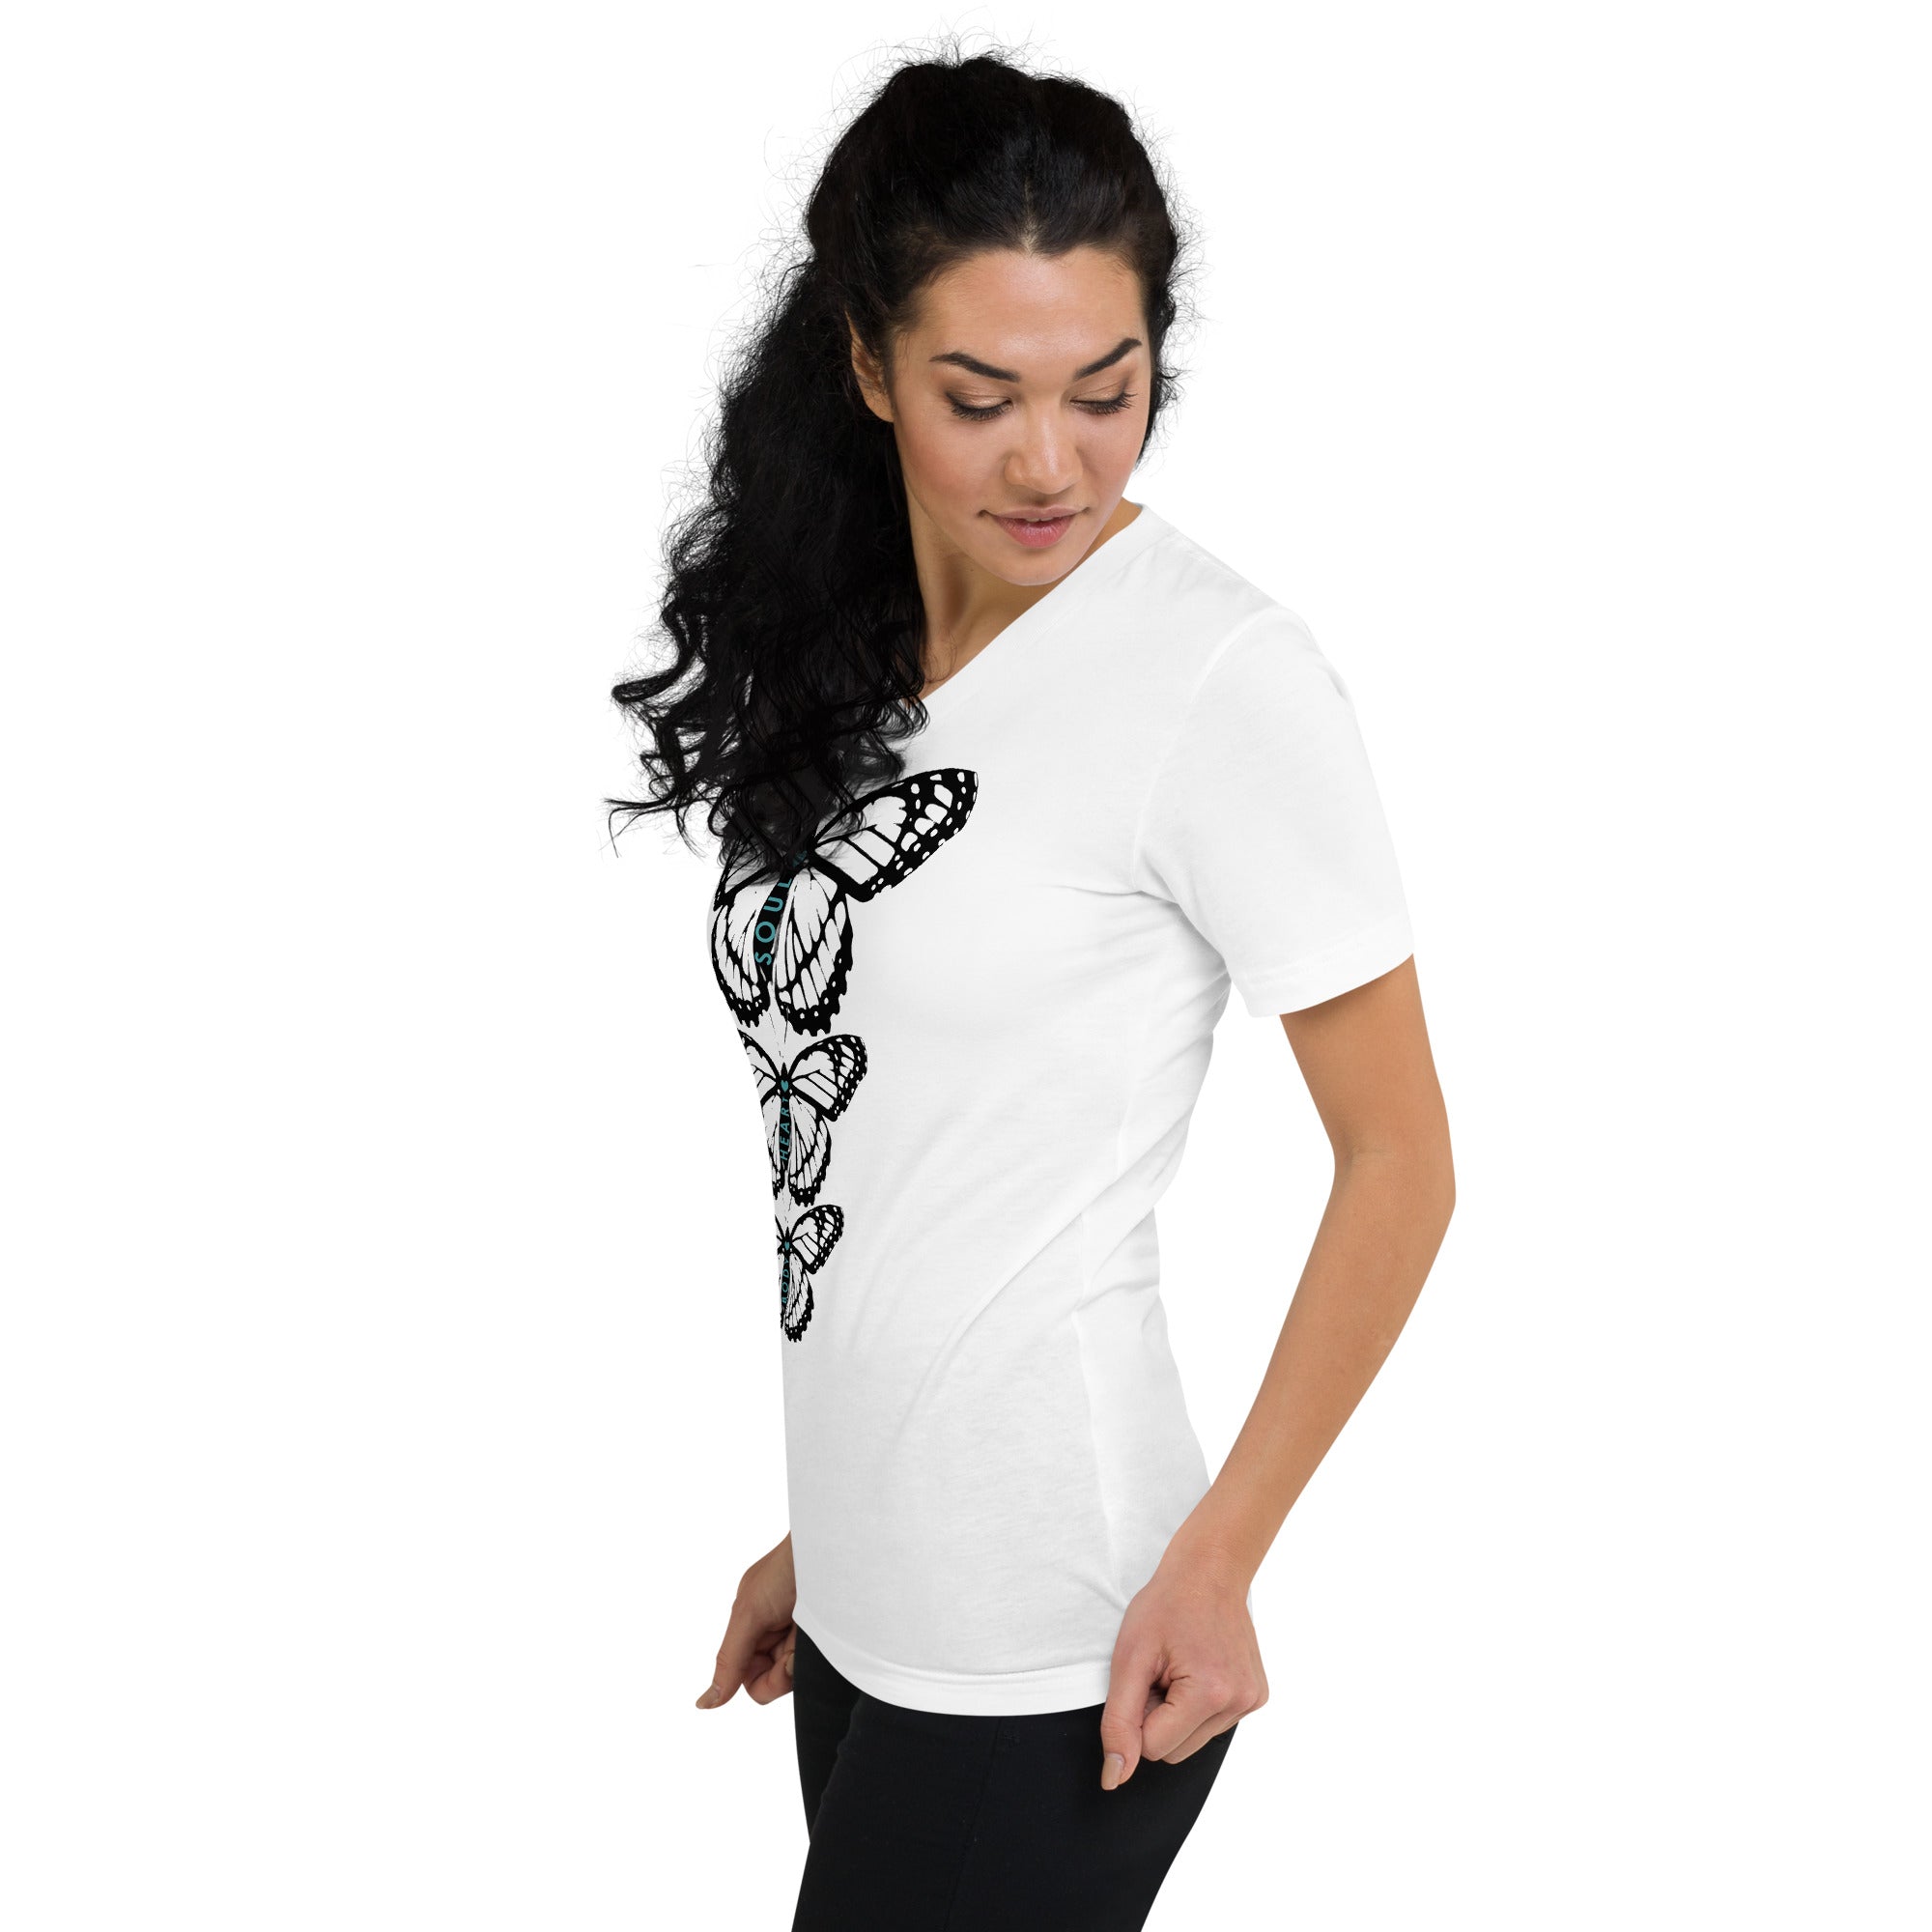 Body, Heart & Soul Butterfly Graphic T-Shirt